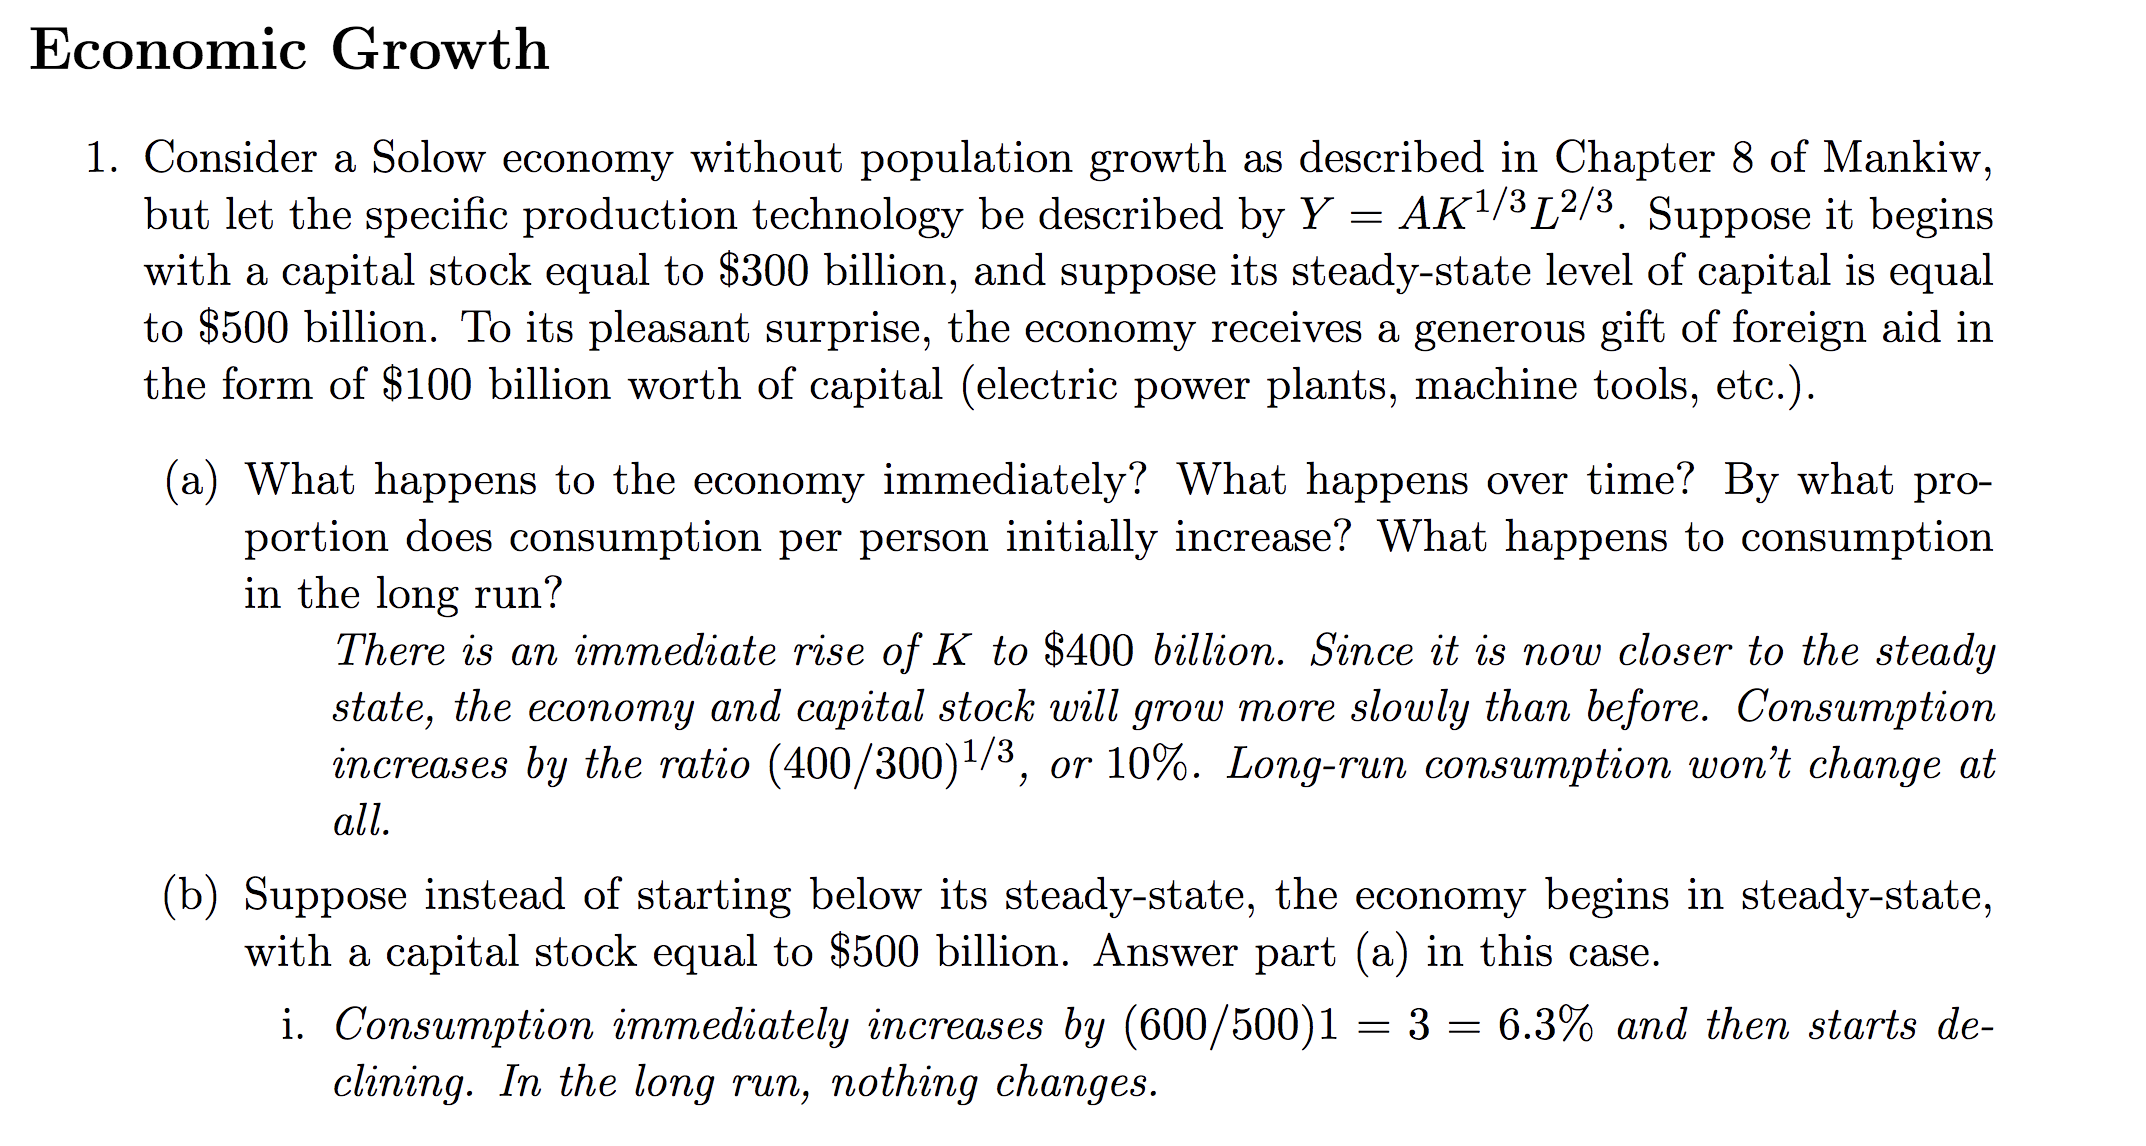 Economic Growth
1. Consider a Solow economy without population growth as described in Chapter 8 of Mankiw,
but let the specific production technologv be described by YAK1/3[2/3. Suppose it begins
with a capital stock equal to $300 billion, and suppose its steady-state level of capital is equal
to $500 b
the form of $100 billion worth of capital (electric power plants, machine tools, etc.)
illion. To its pleasant surprise, the economy receives a generous gift of foreign aid in
(a) What happens to the economy immediately? What happens over time? By what pro-
ortion does consumption per person initially increase? What happens to consumption
in the long run!
There is an immediate rise of K to $400 billion. Since it is now closer to the steady
state, the economy and capital stock will grow more slowly than before. Consumption
increases by the ratio (400 /30011/3, or 10%. Long-run consumption won't change at
all
(b) Suppose instead of starting below its steady-state, the economy begins in steady-state,
with a capital stock equal to $500 billion. Answer part (a) in this case
. Consumption immediately increases by 1600/ 5001 = 3 = 6.3% and then starts de-
clining. In the long
run, nothing changes
